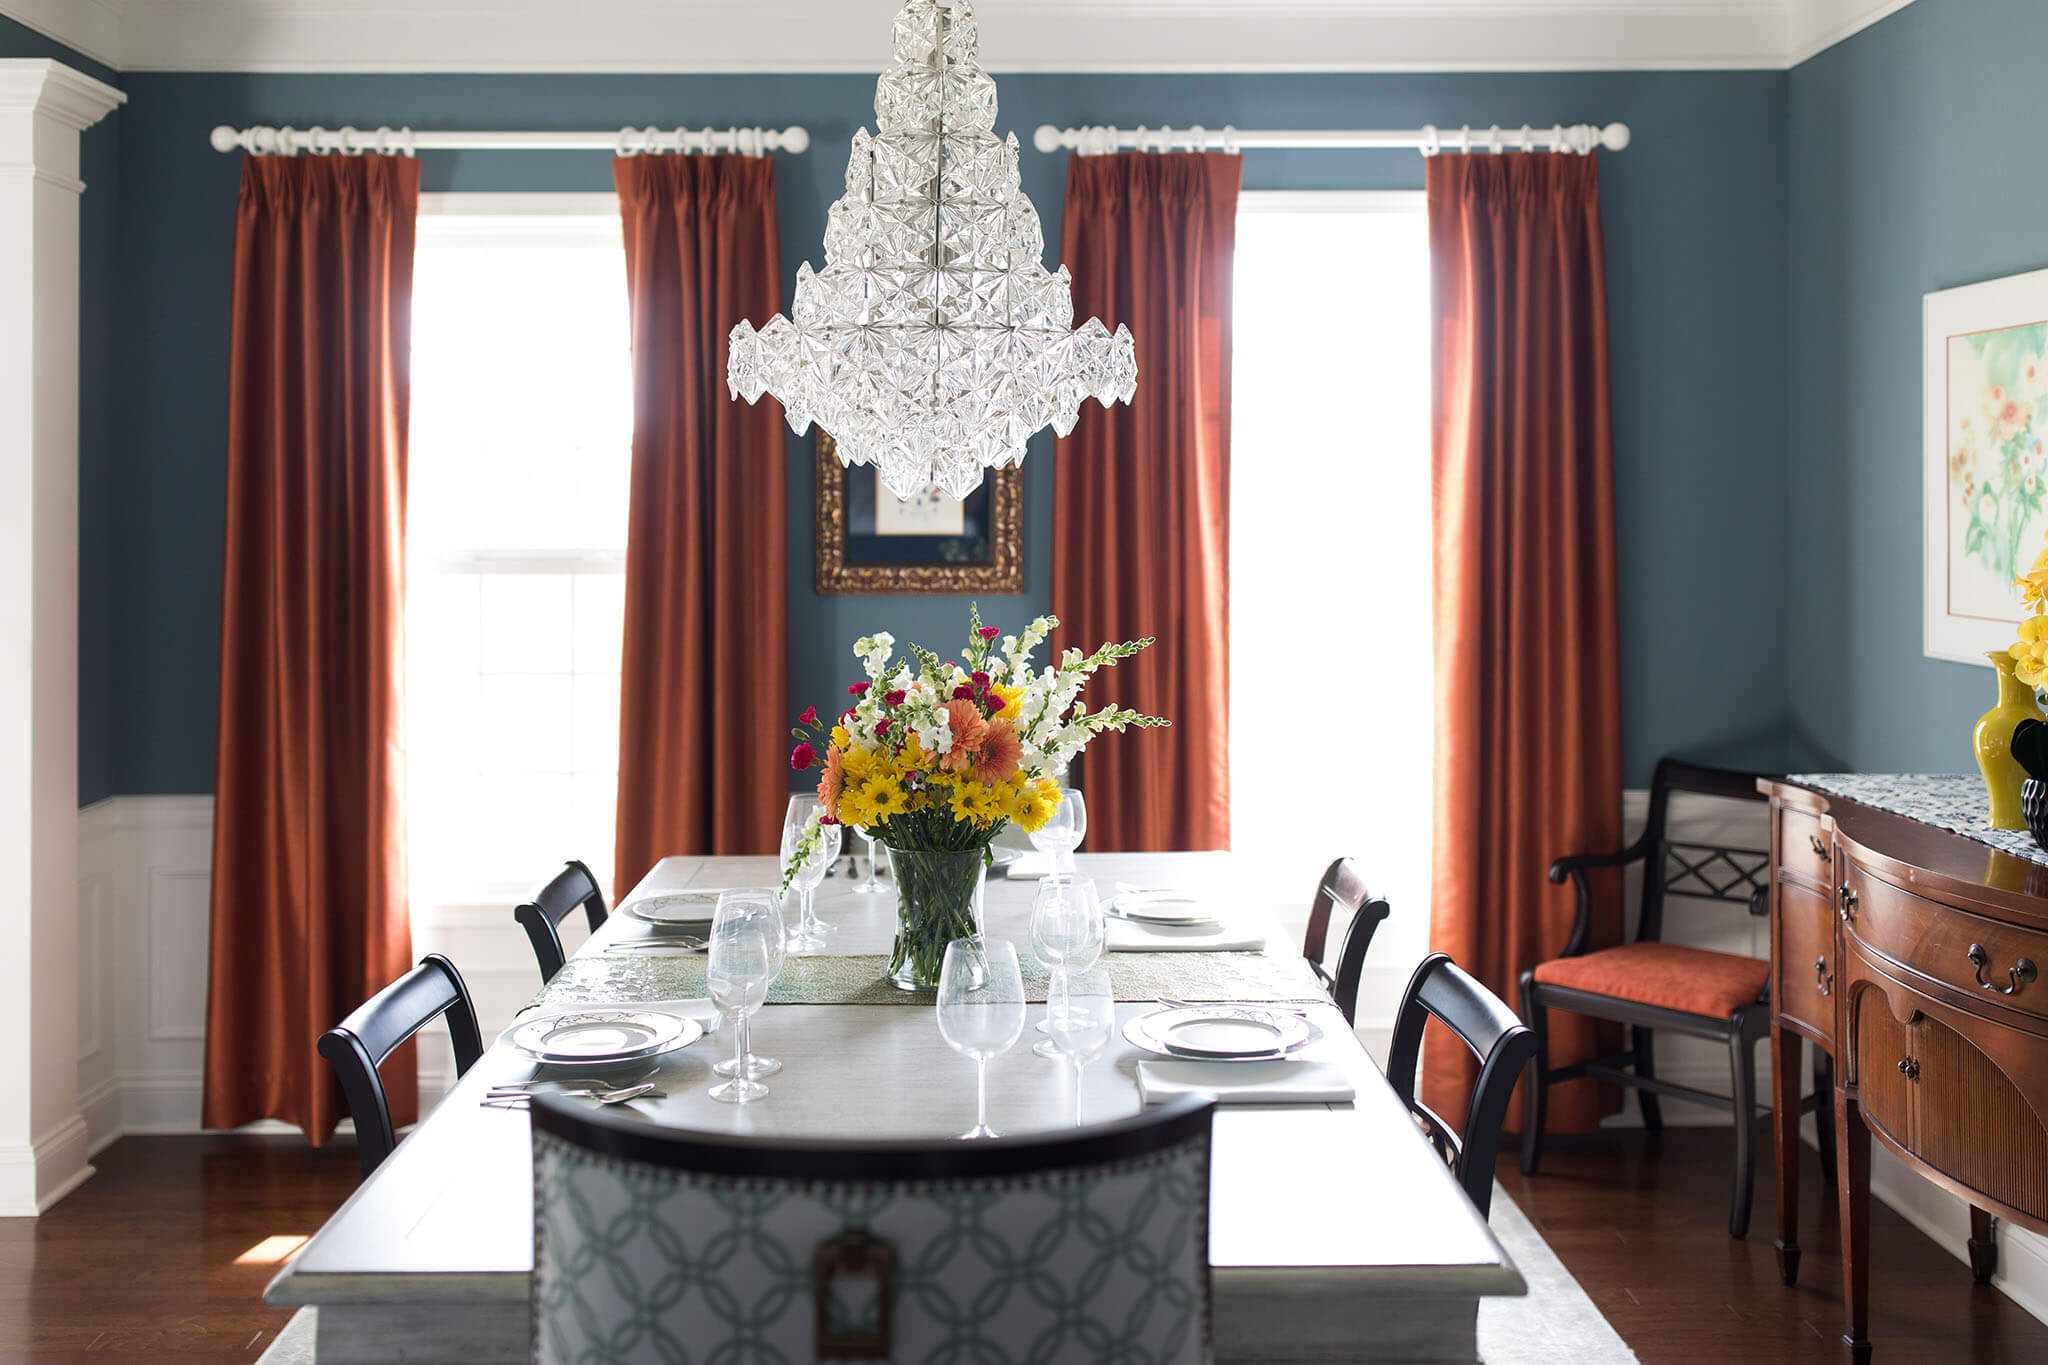 Colorful Contemporary Dining Room with Orange drapery panels contrasting blue walls Lindsey Putzier Design Studio